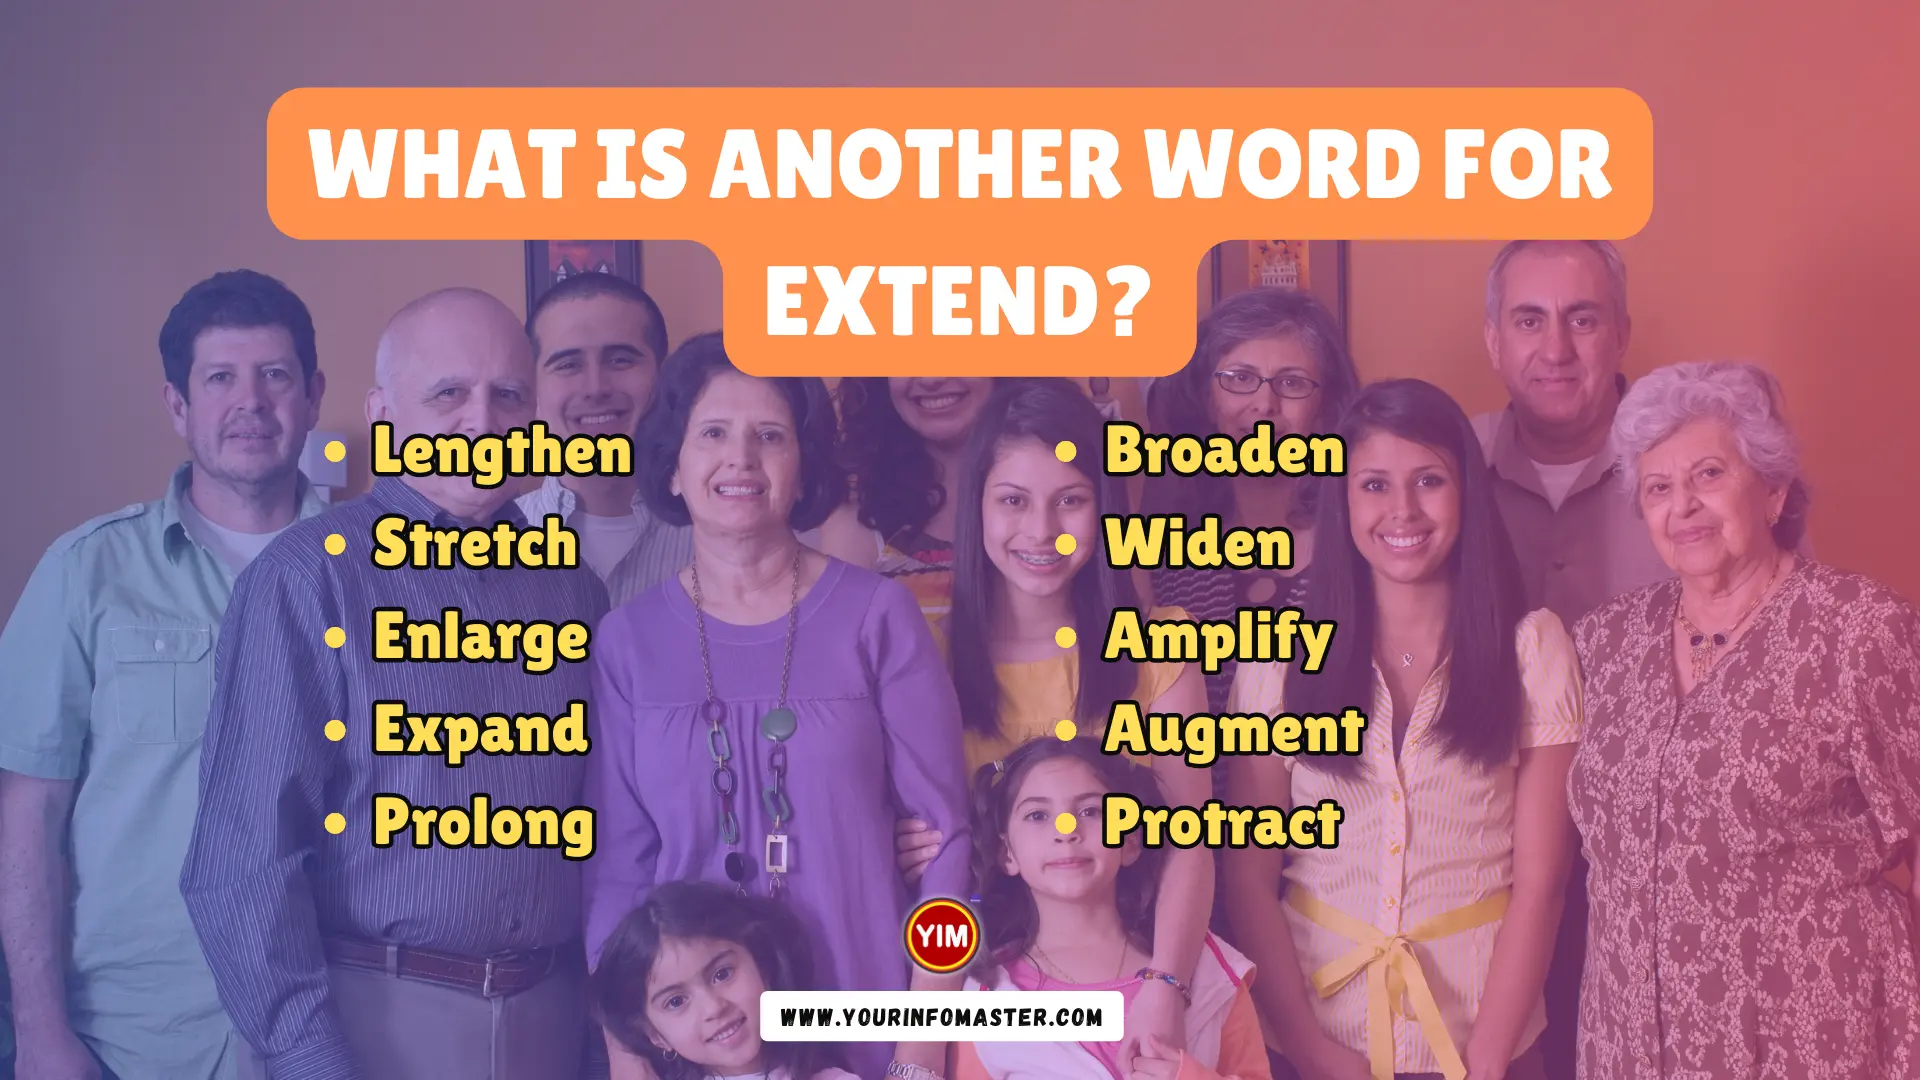 What is another word for Extend